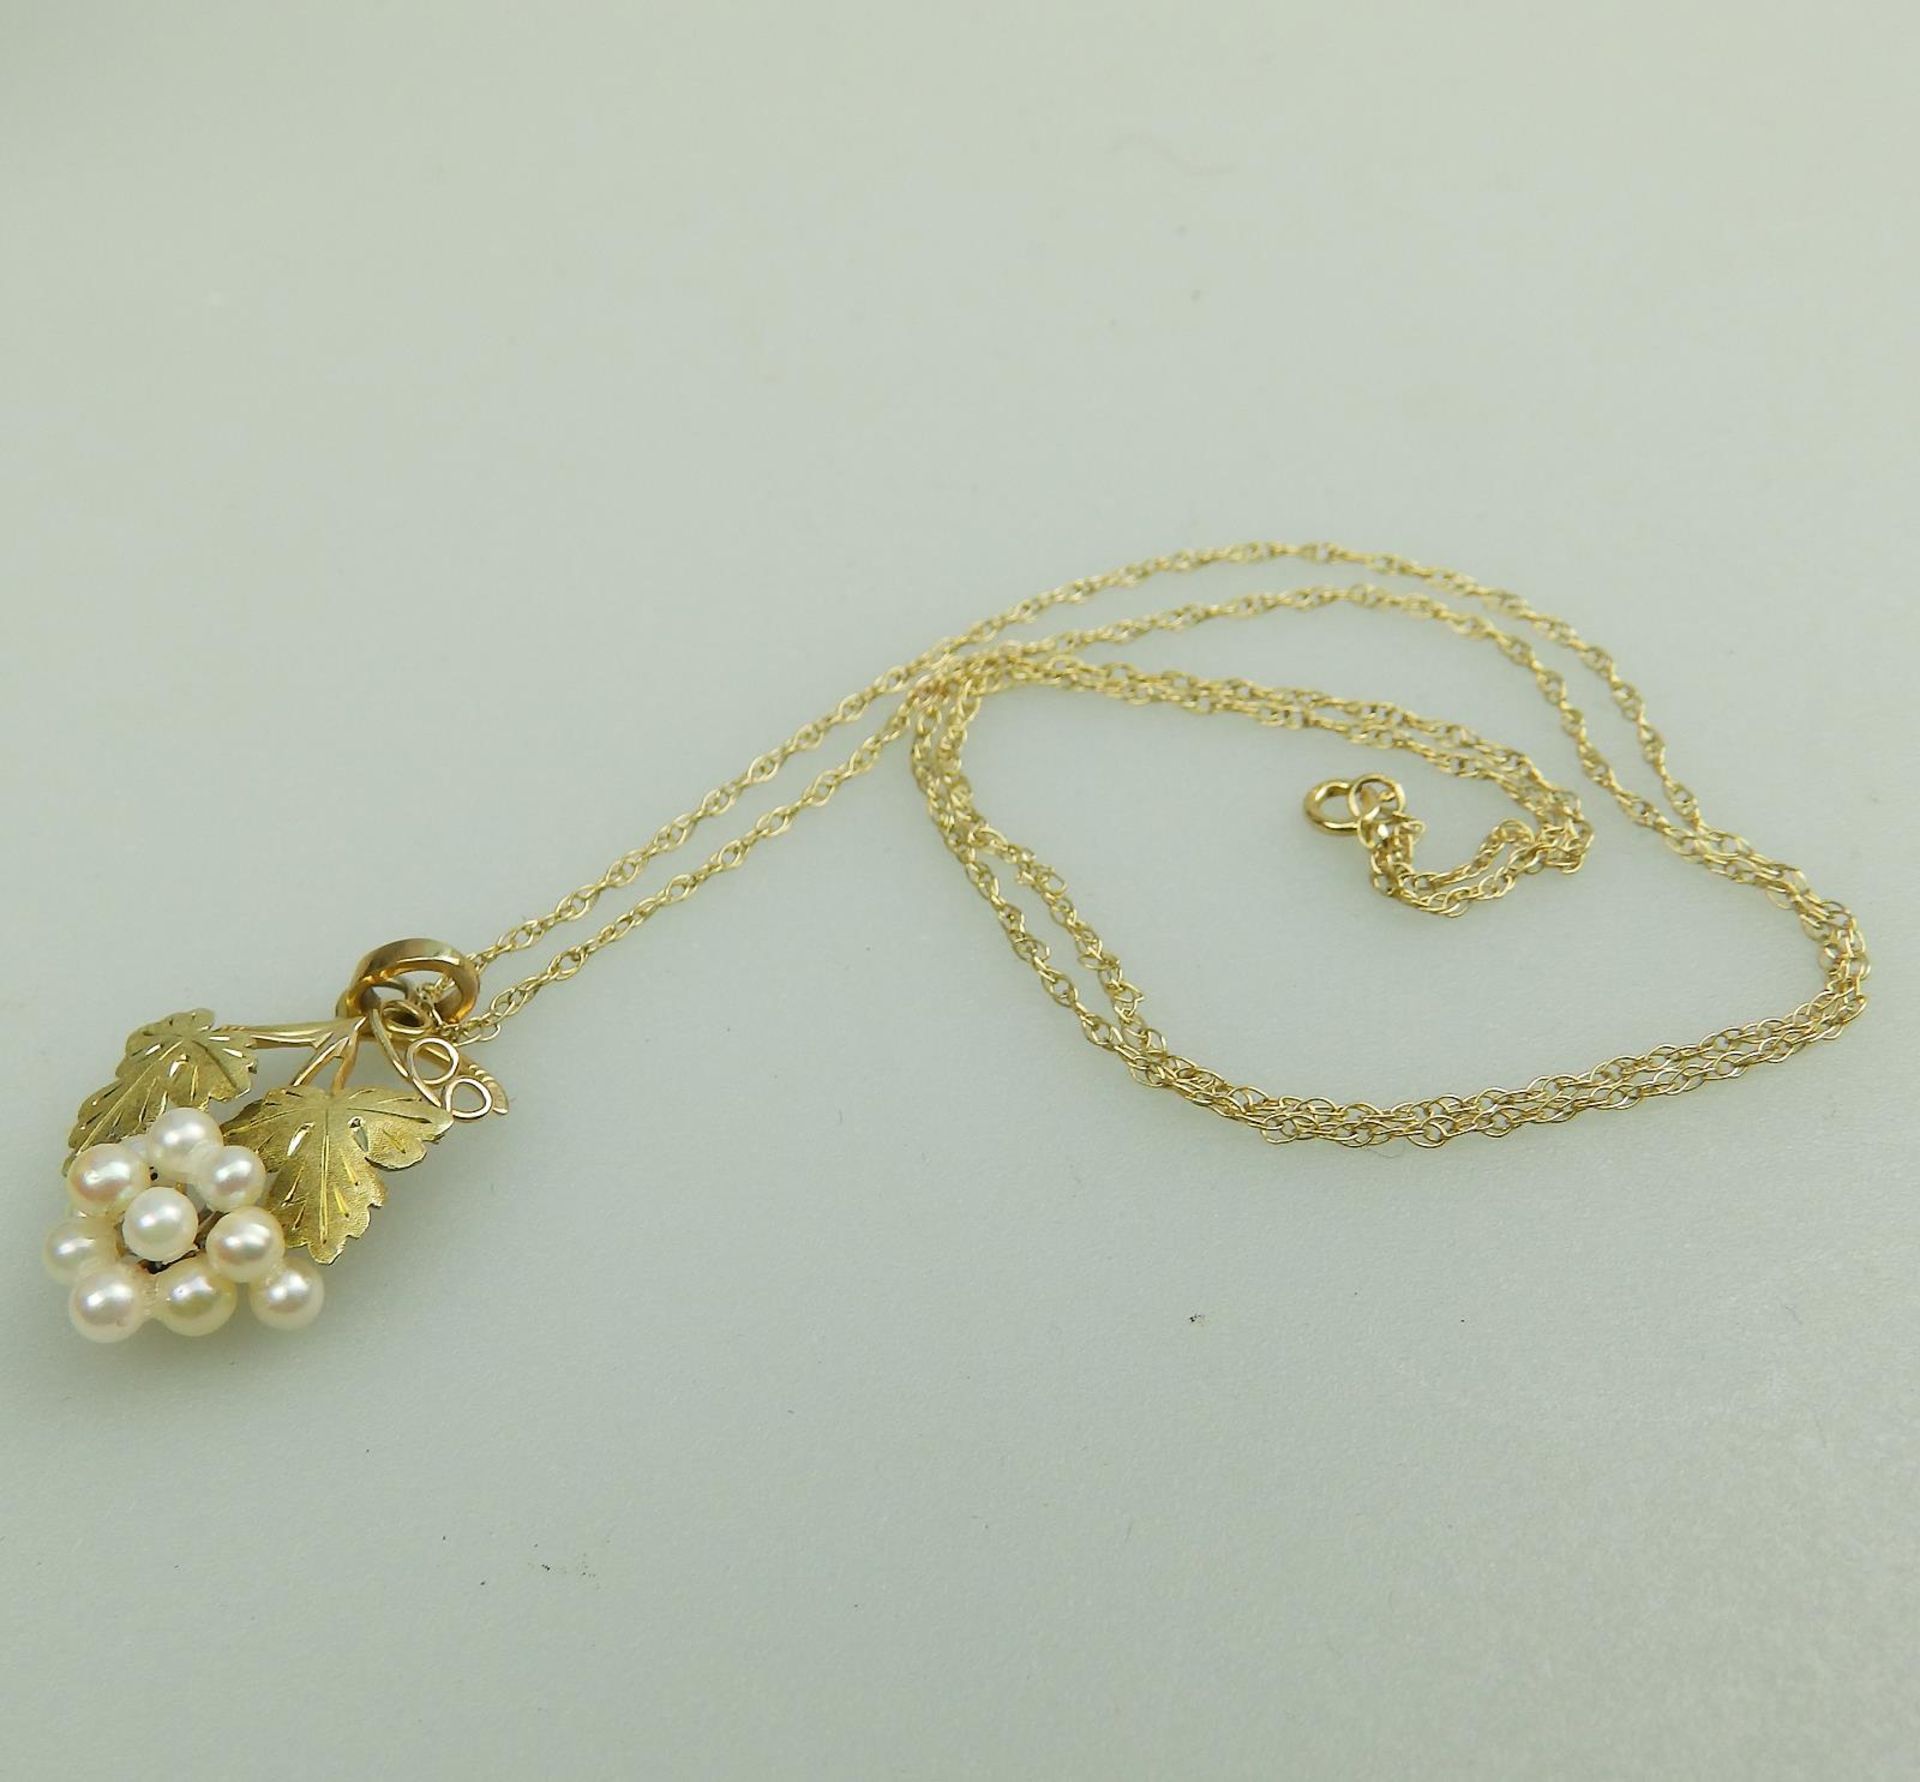 A 14 ct gold designer Pendant and chain, boxed - Image 2 of 4